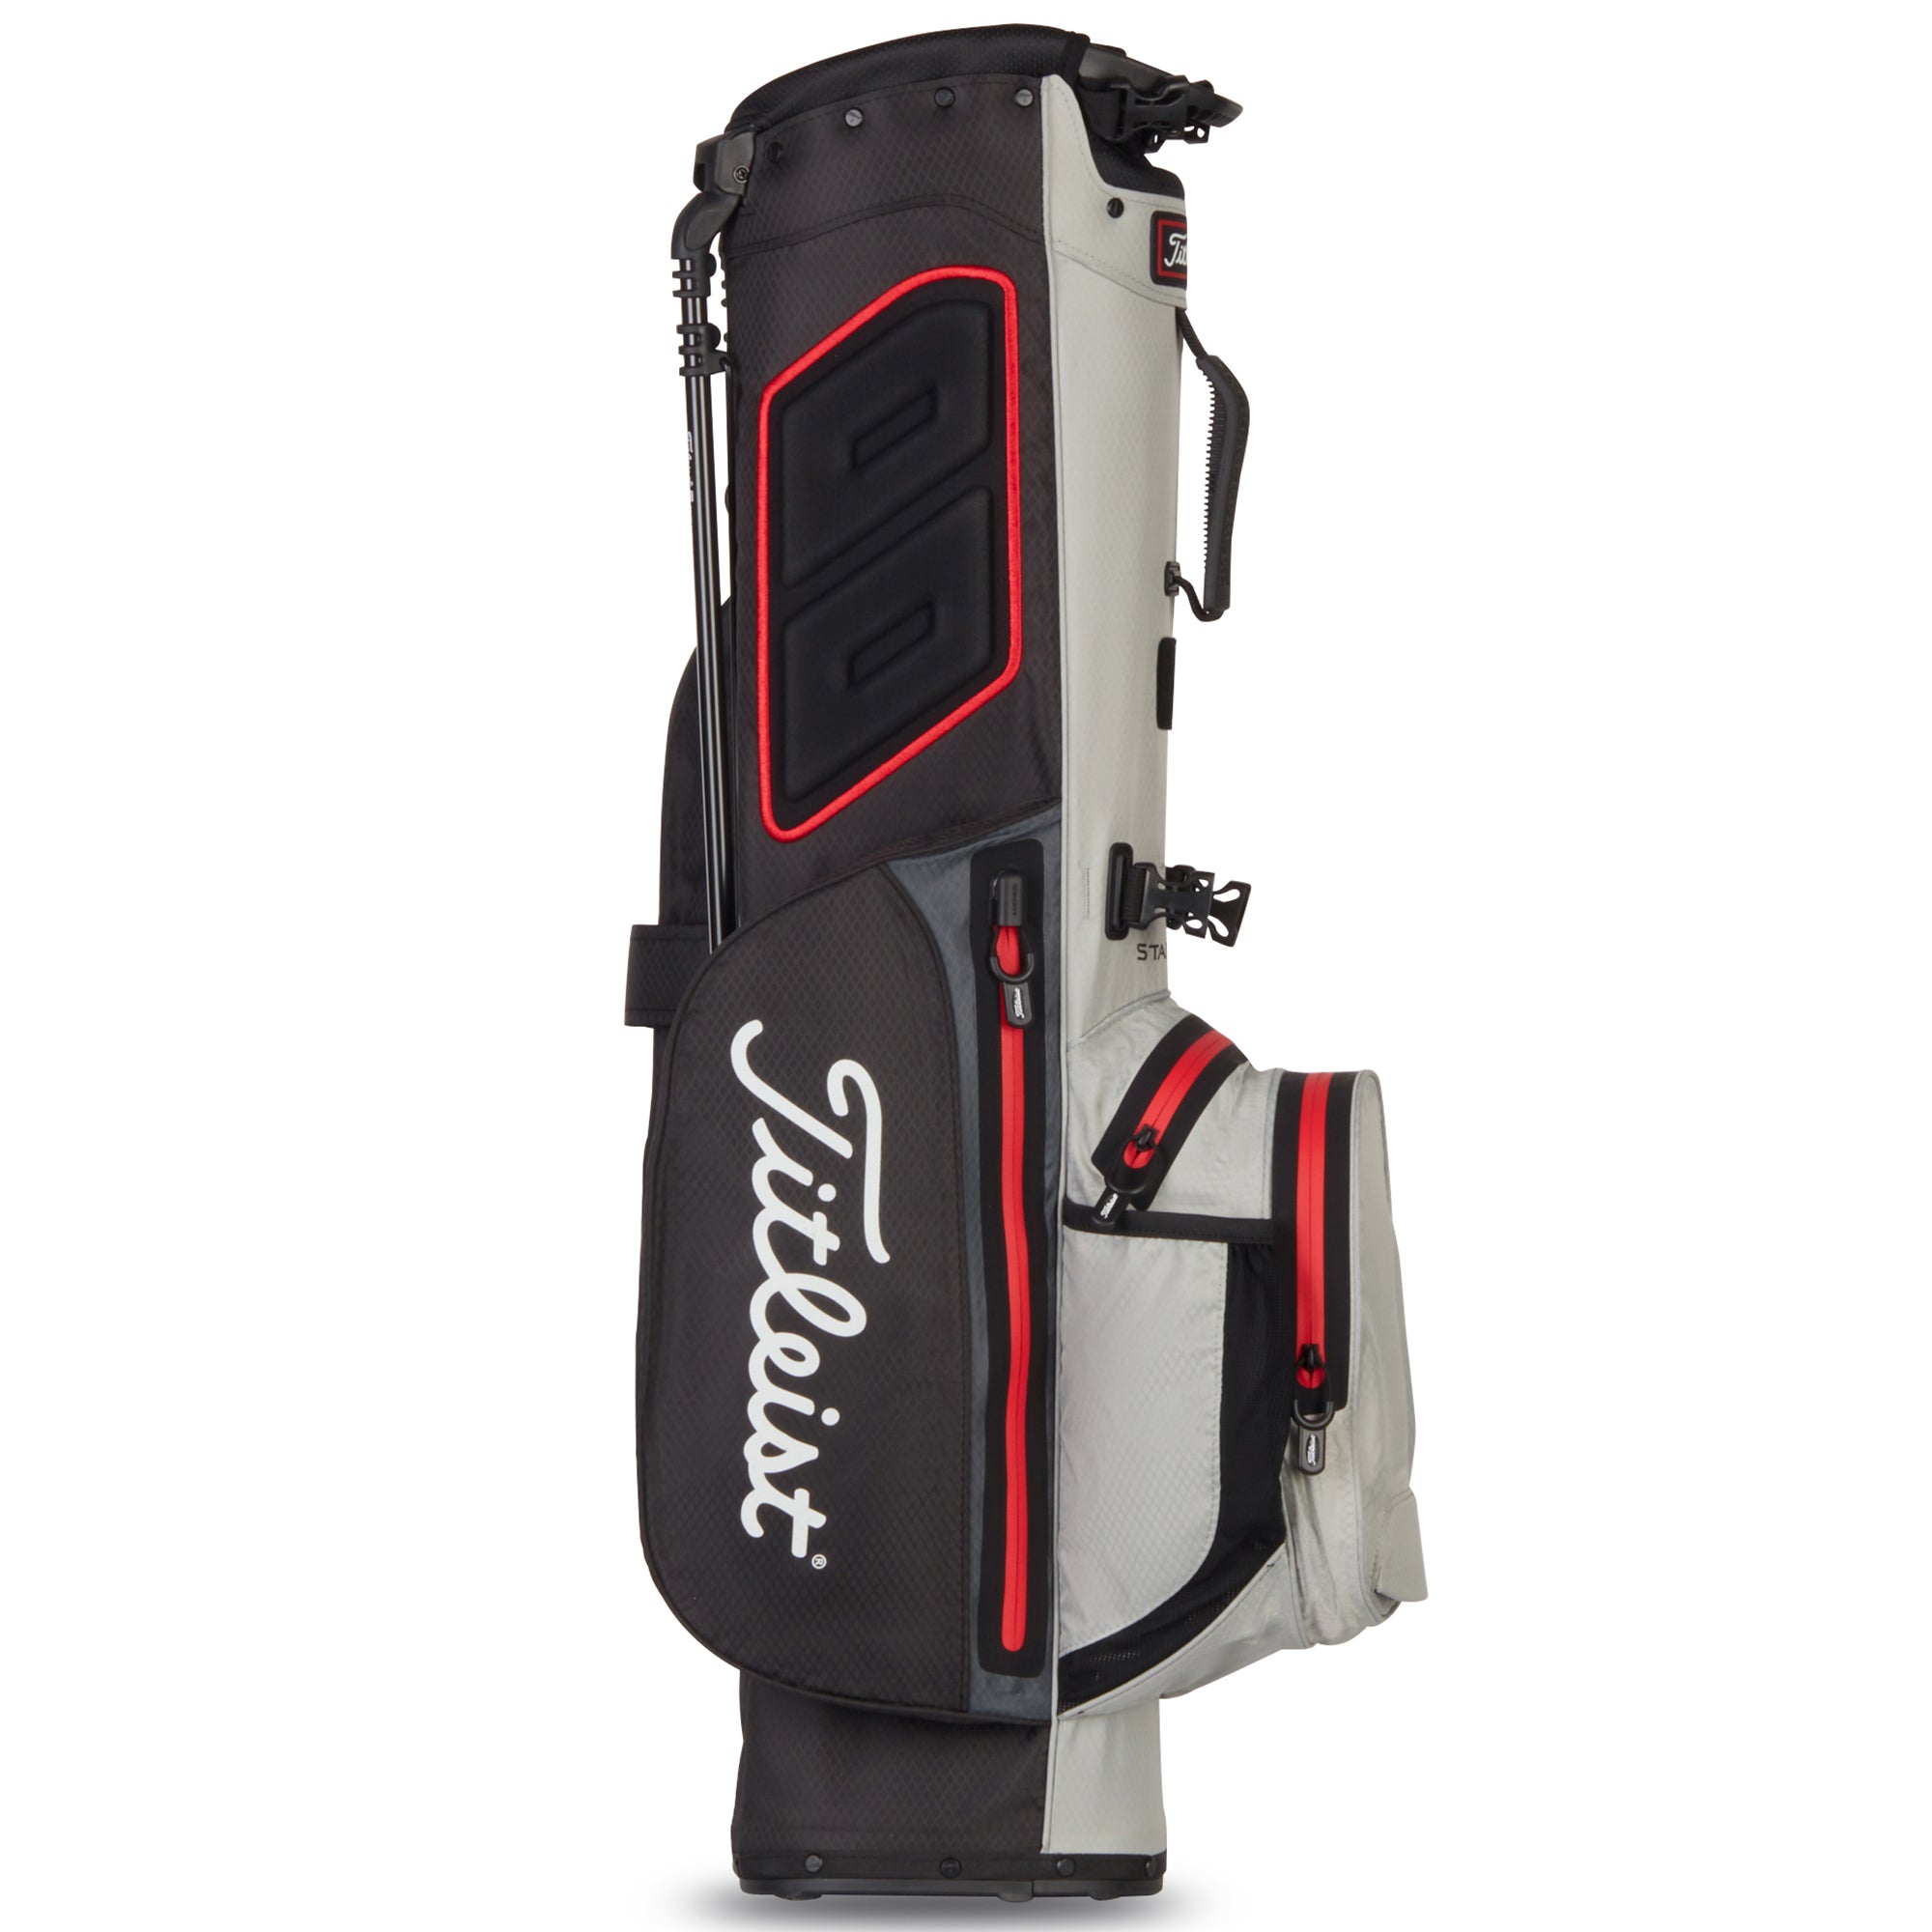 titleist-players-4-stadry-stand-bag-tb21sx2026